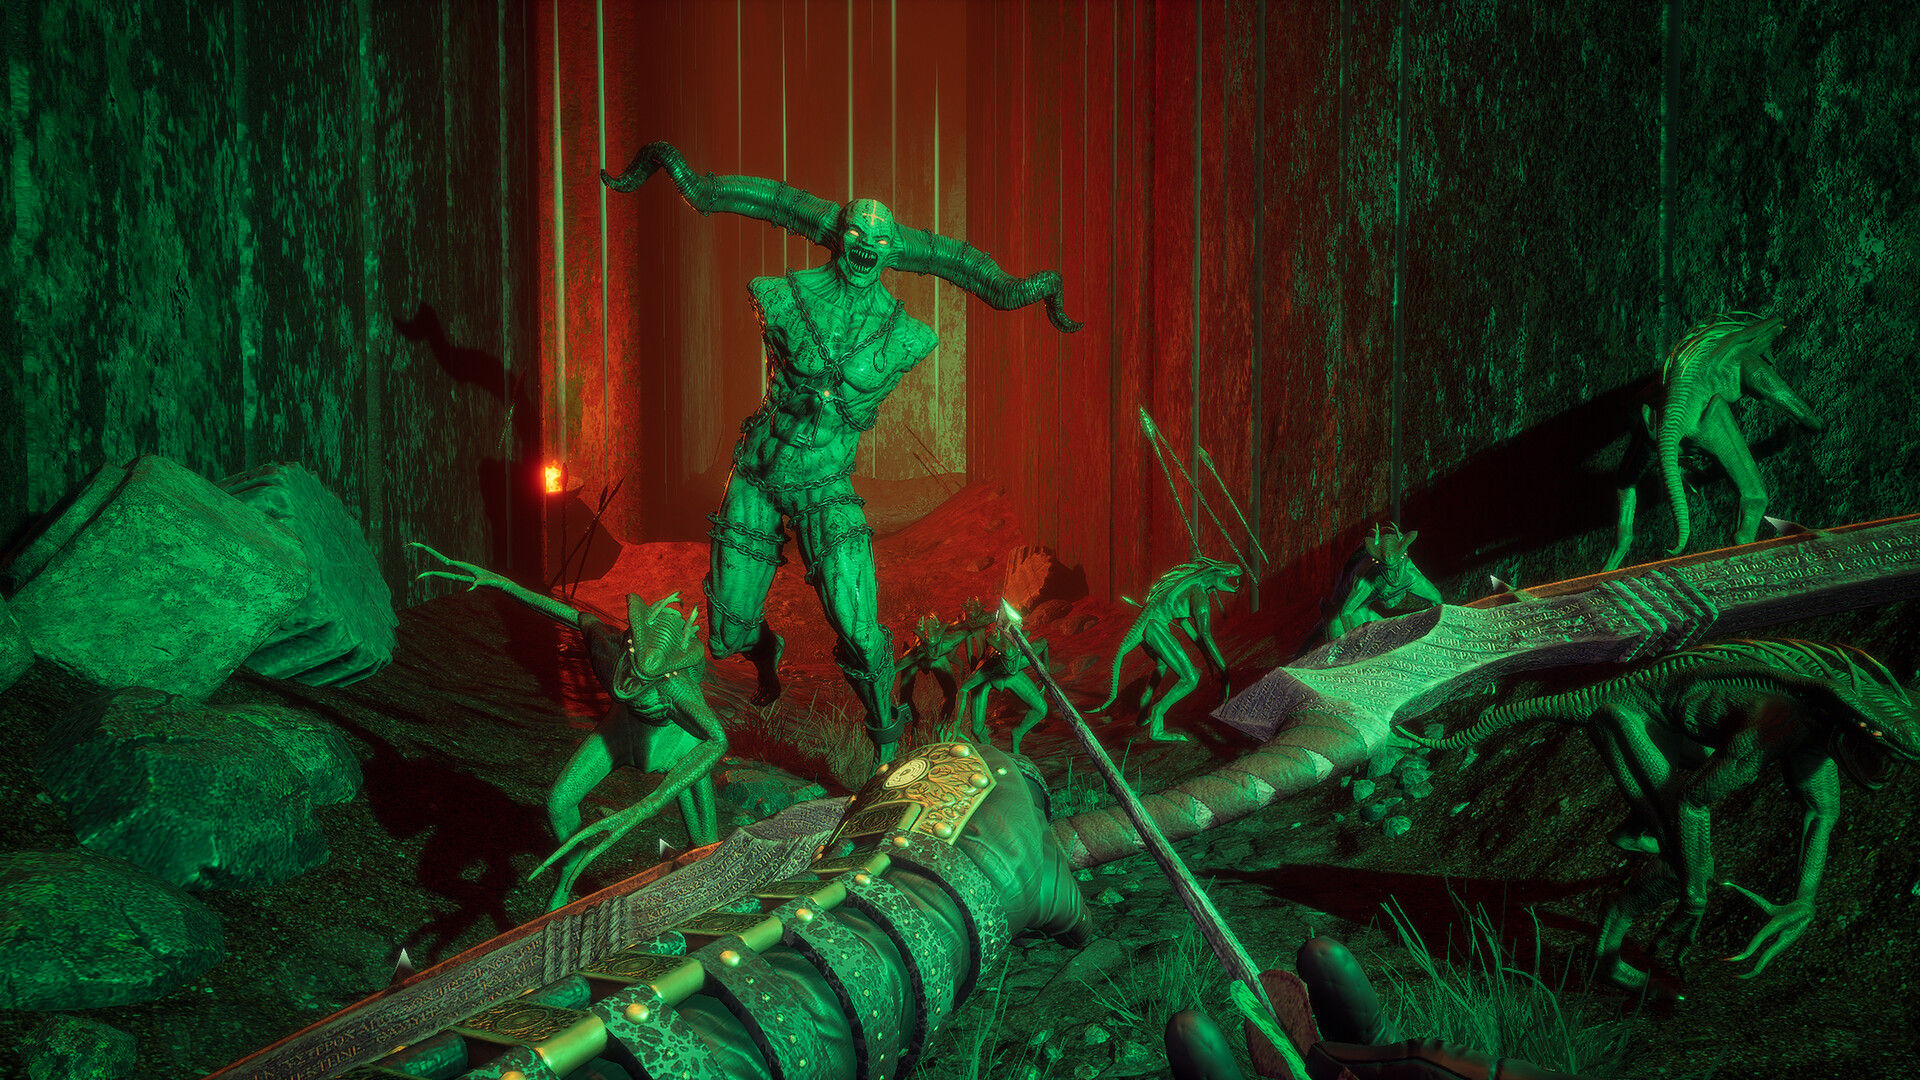 Fight through the Greek afterlife with blade and shot in this grimy, gilded FPS